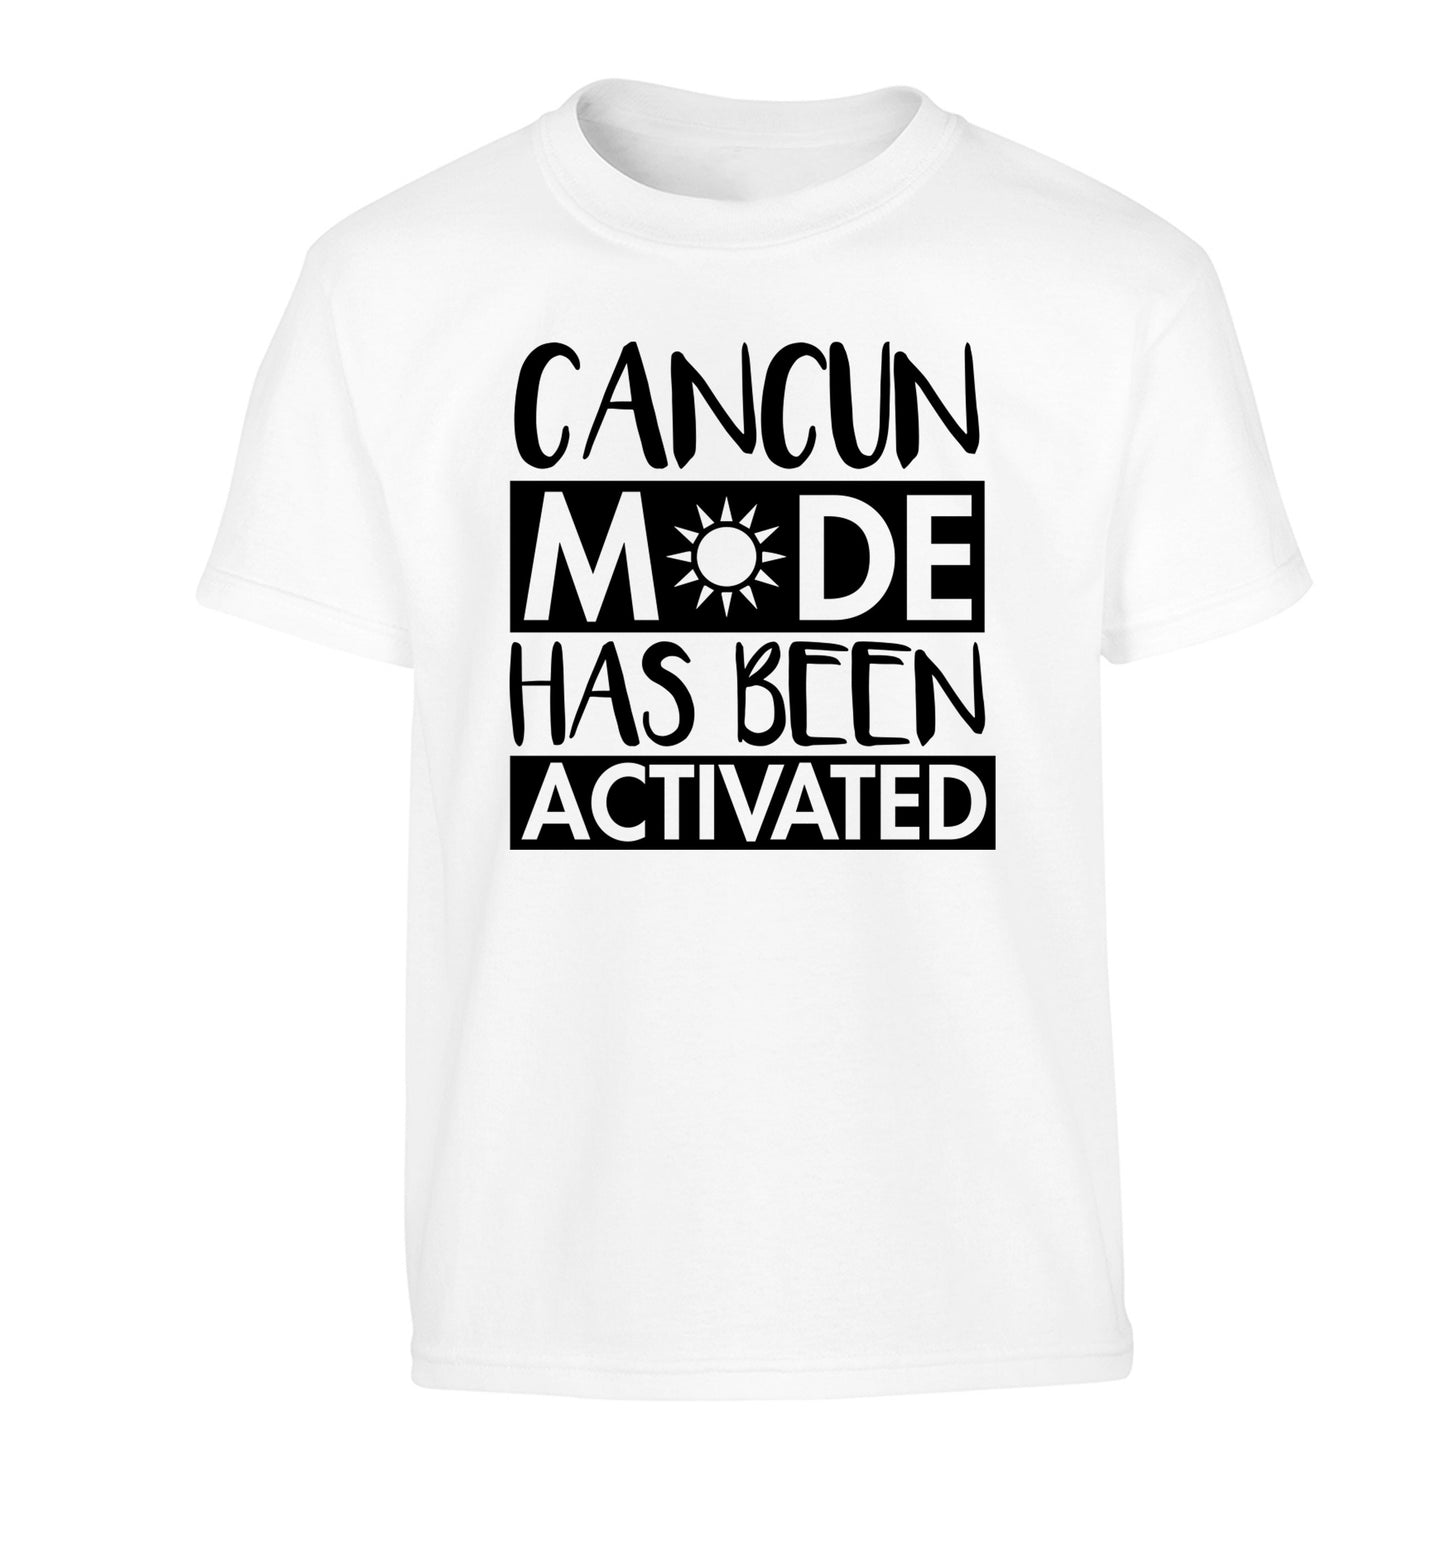 Cancun mode has been activated Children's white Tshirt 12-14 Years